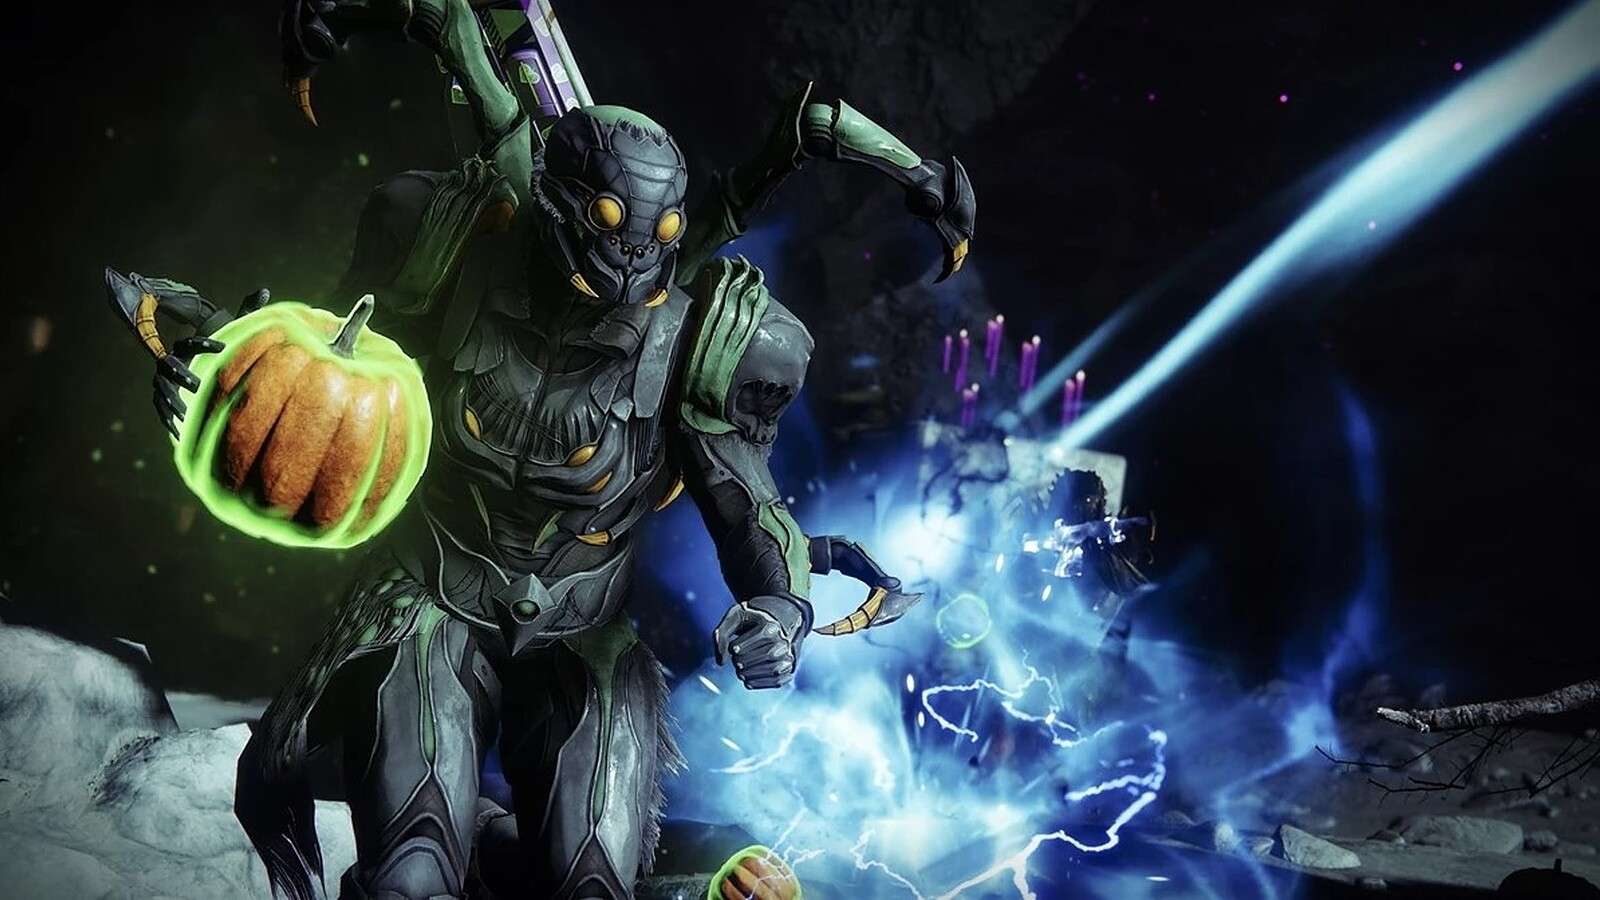 A Guardian carries a pumpkin in the Festival of the Lost event